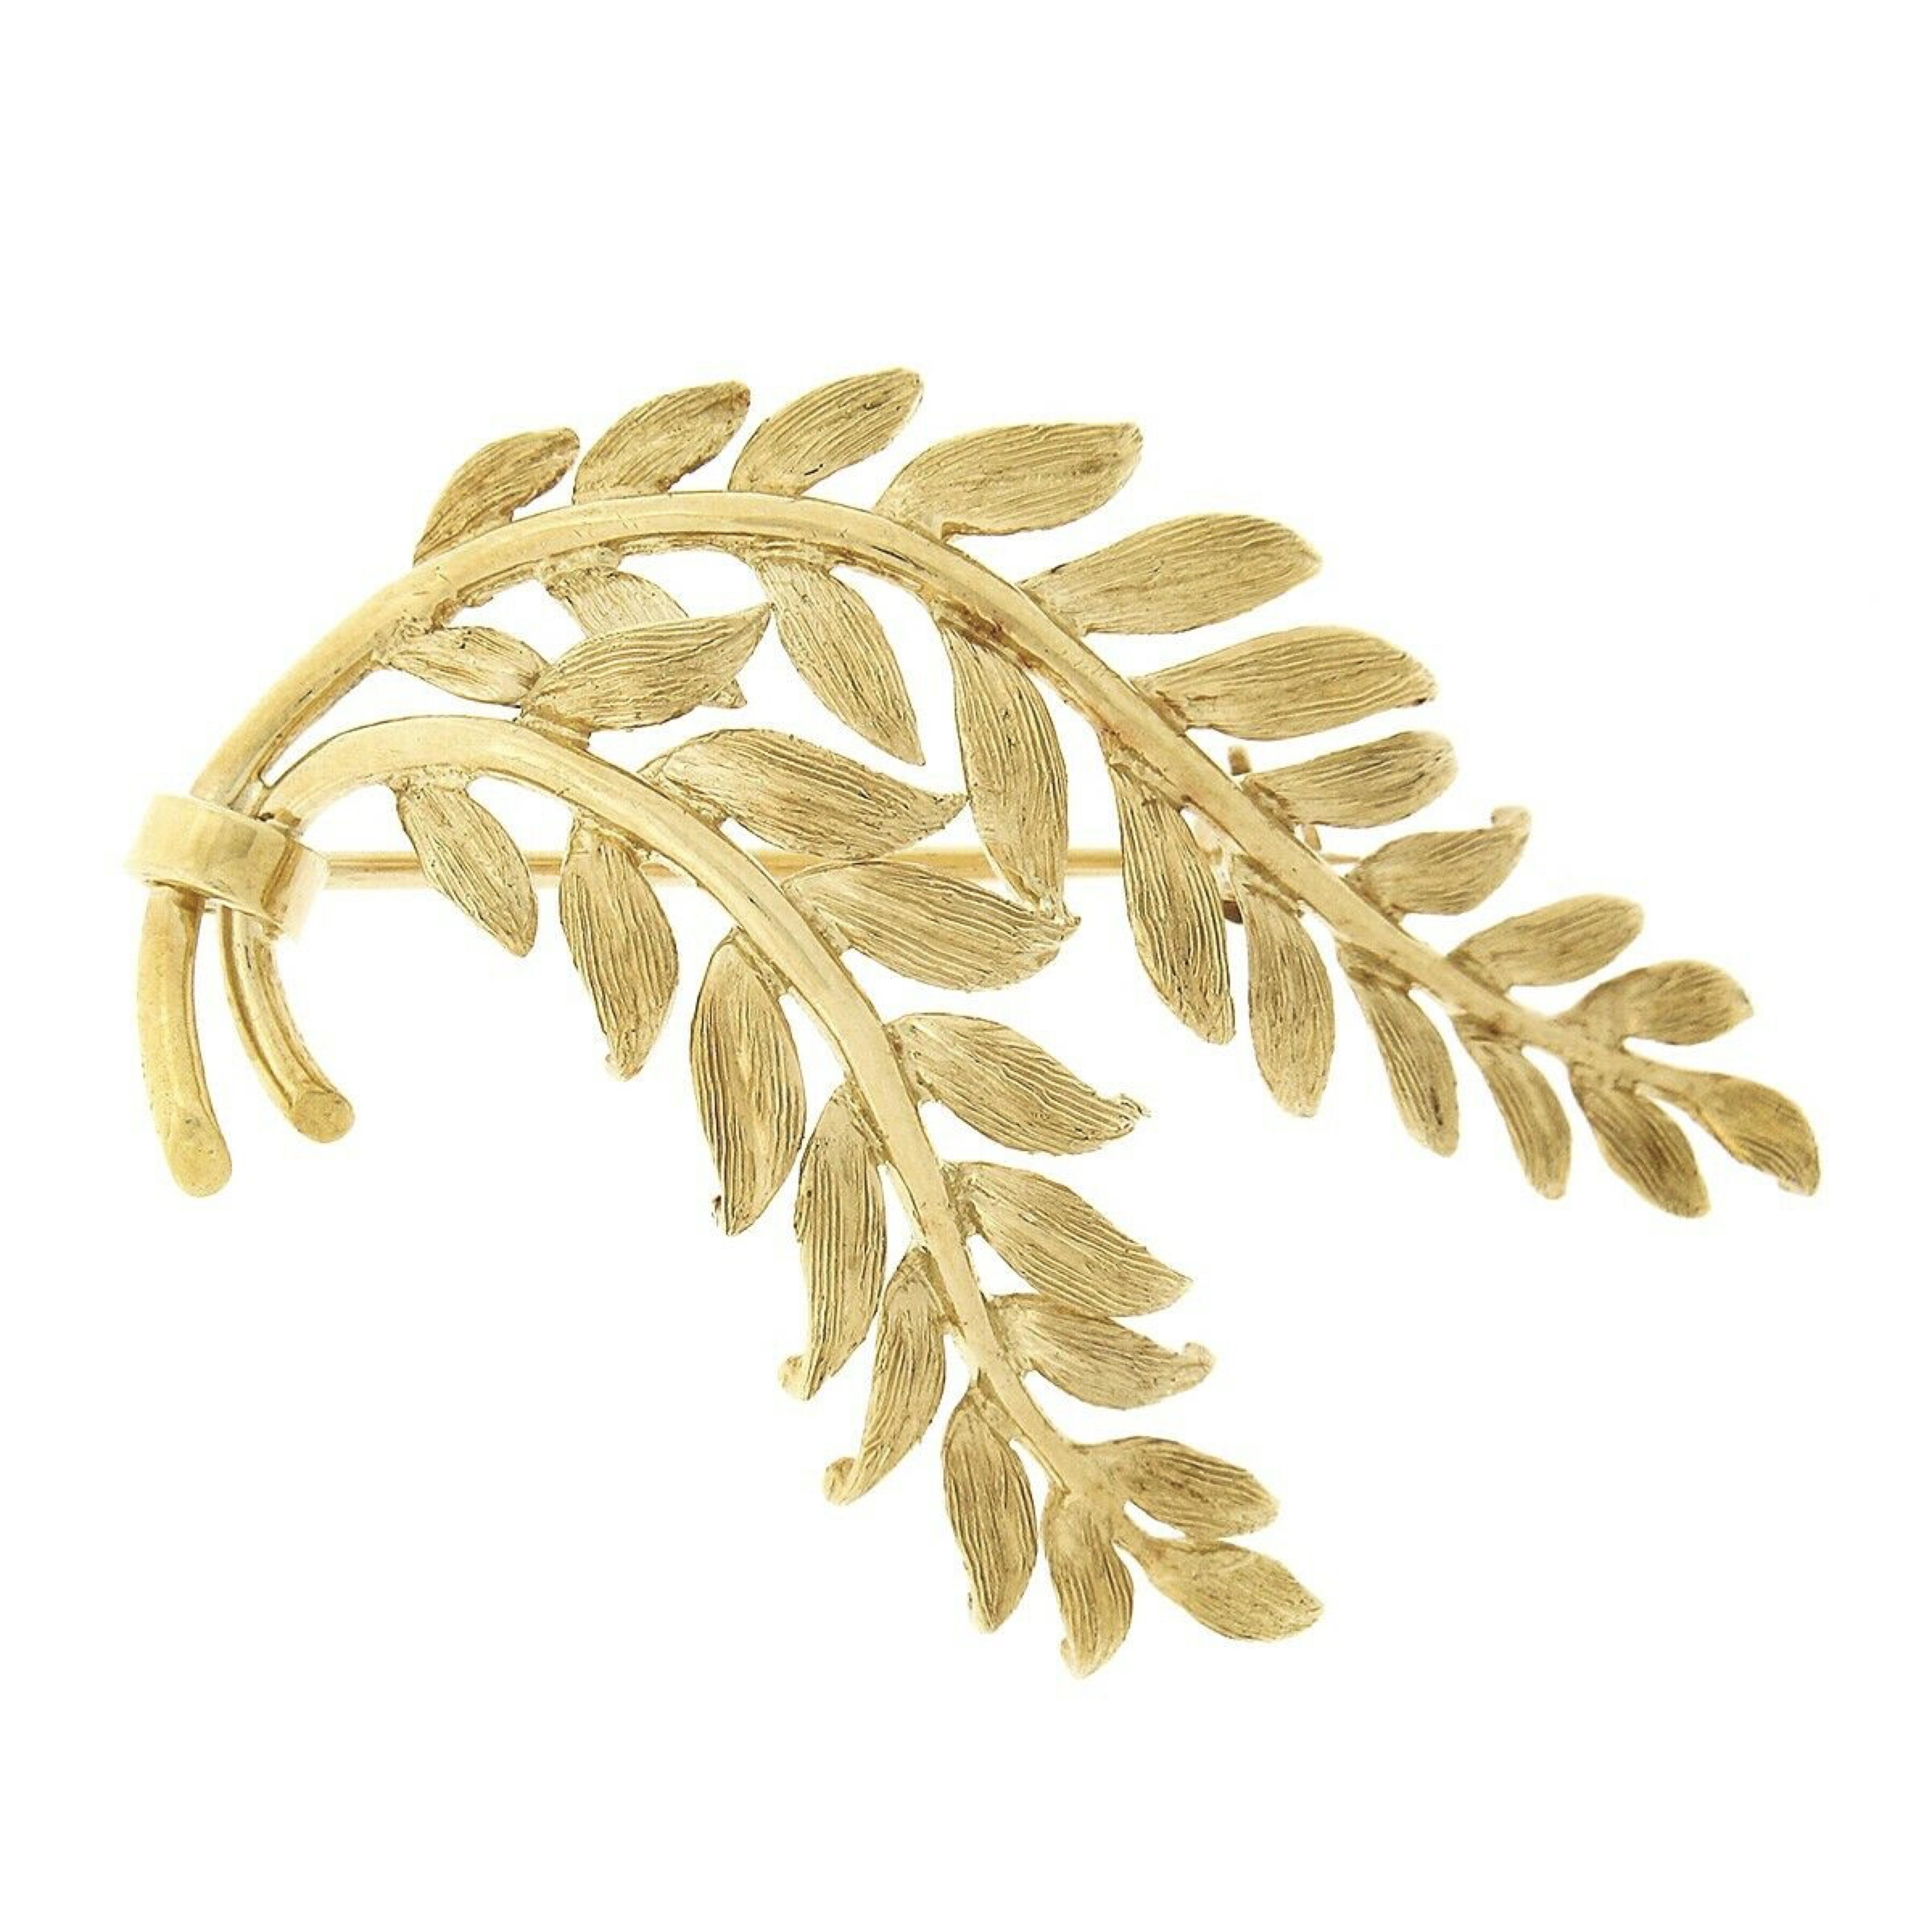 This gorgeous vintage Tiffany & Co. brooch was crafted in Italy from solid 18k yellow gold and features an incredible and realistic looking fern leaf bundle. The leaves on the stems are wonderfully detailed with a textured finish throughout and the